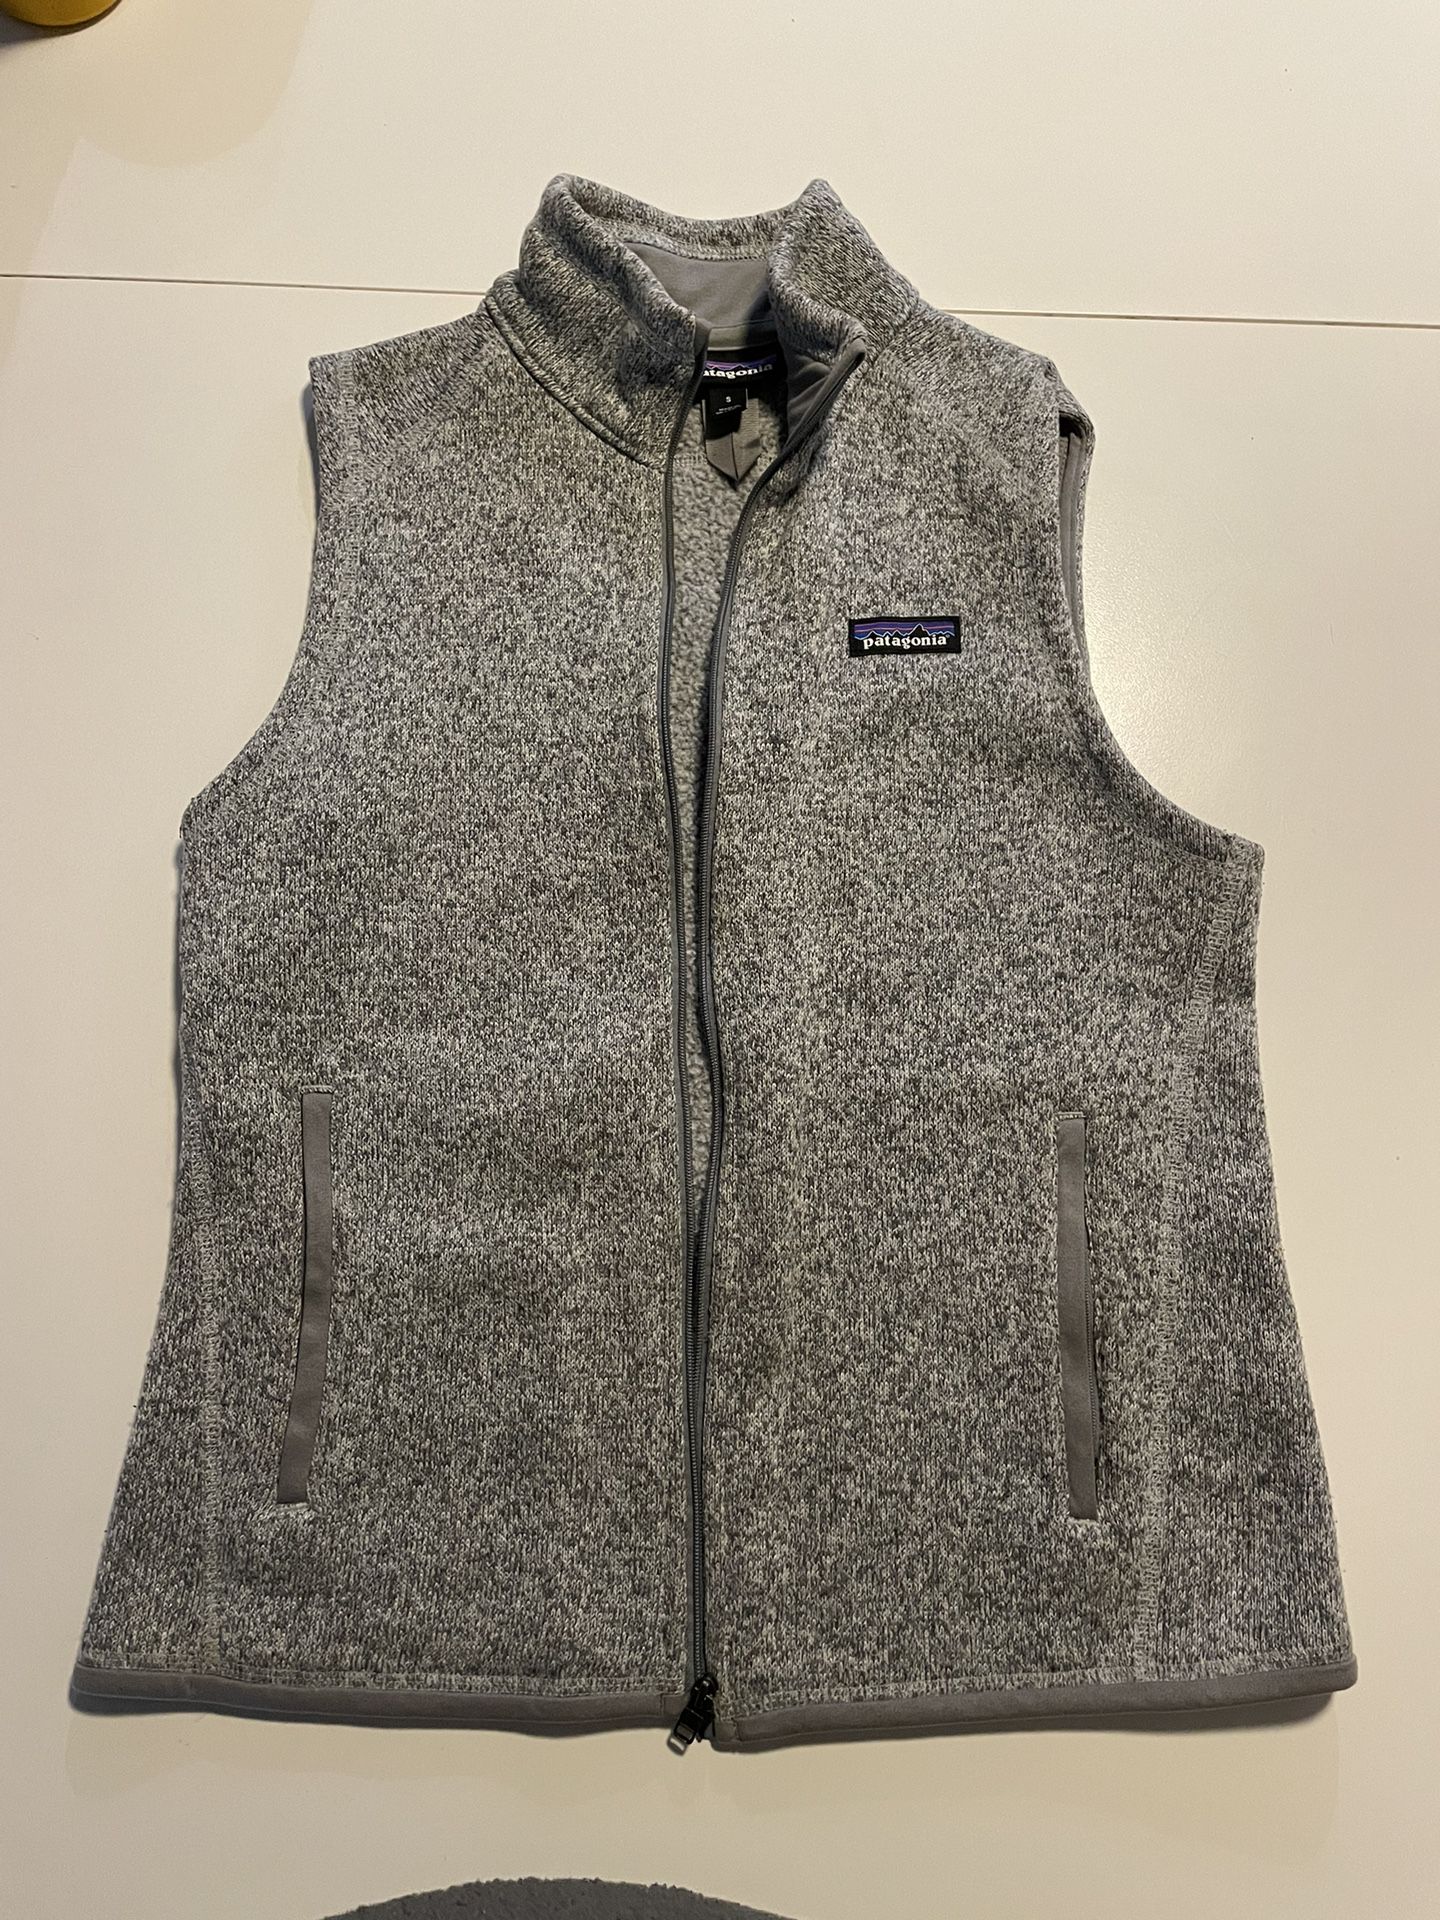 Patagonia Women’s Better Sweater Vest